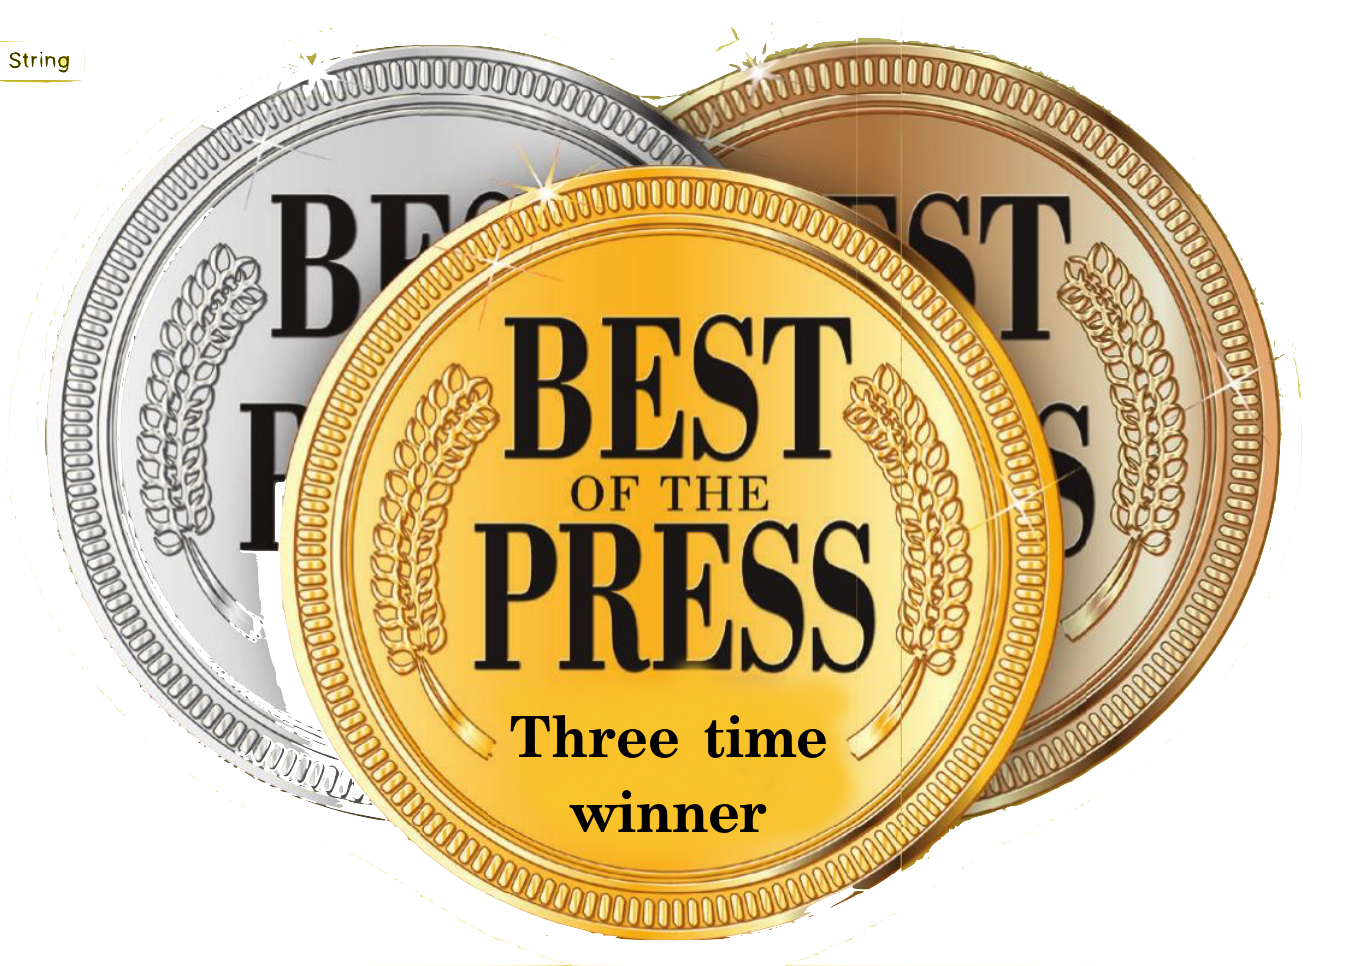 BEST OF THE PRESS